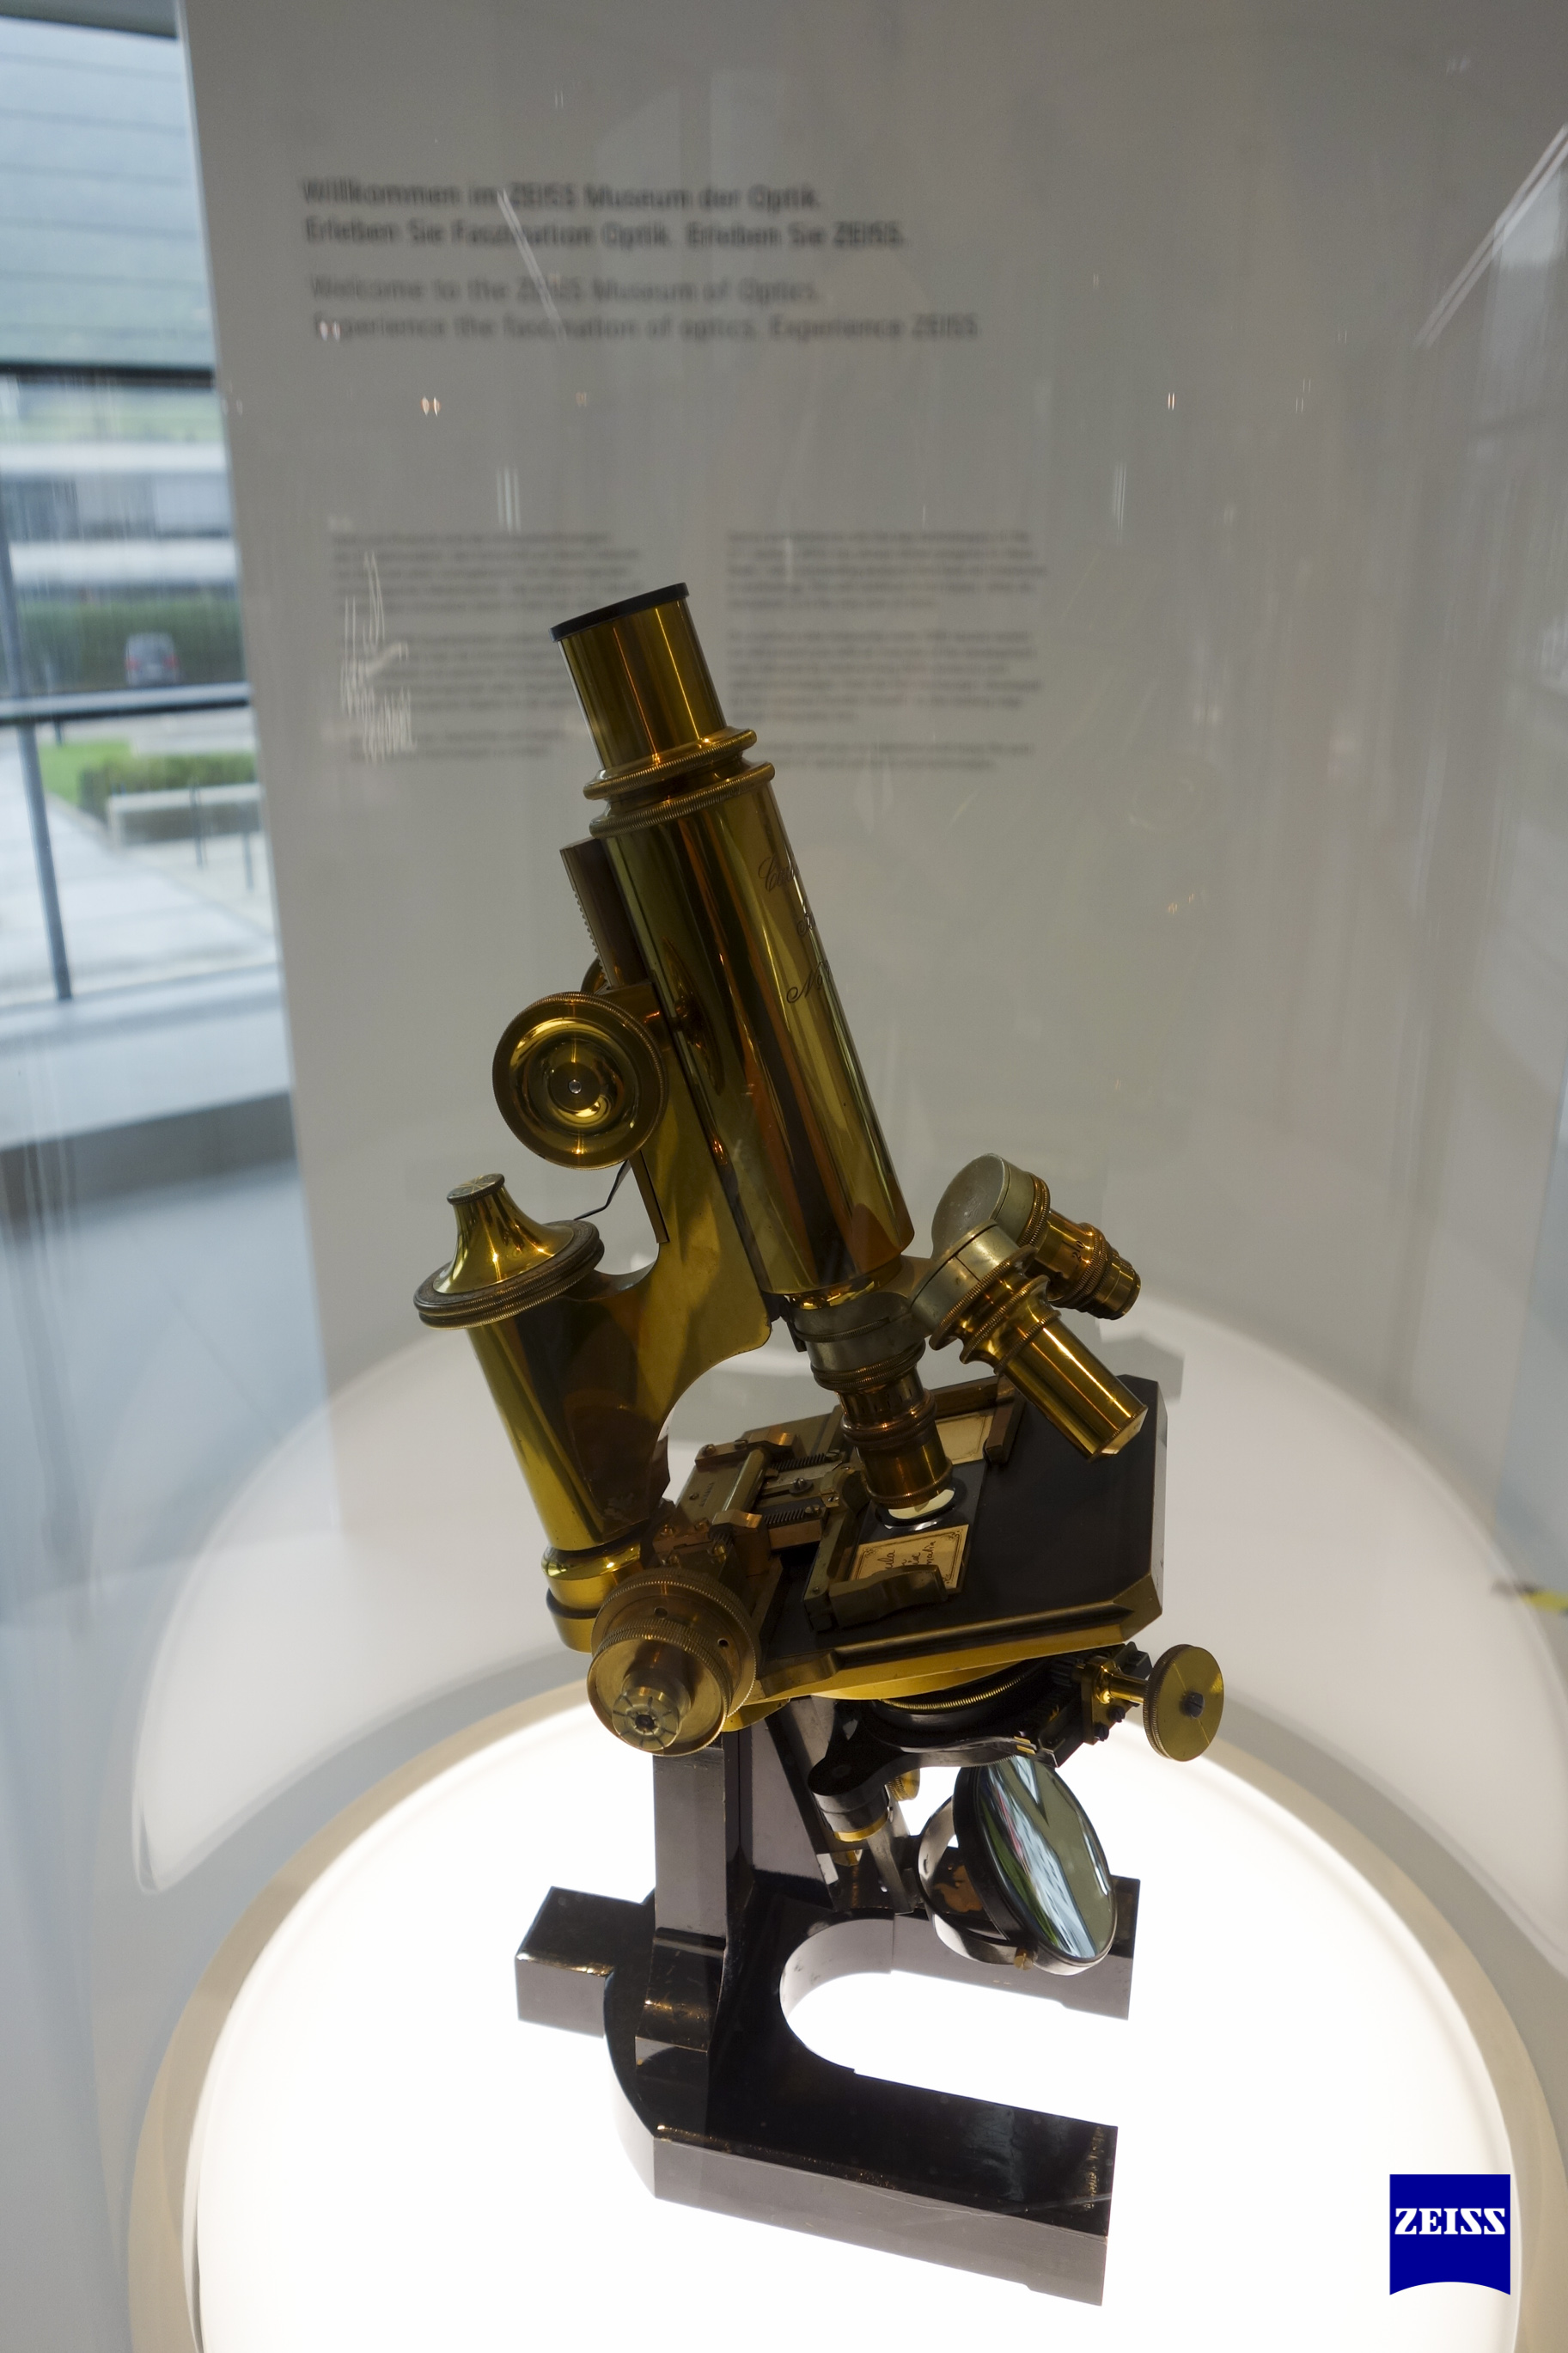 Opening of the ZEISS Forum and Museum of Optics - 14737024421